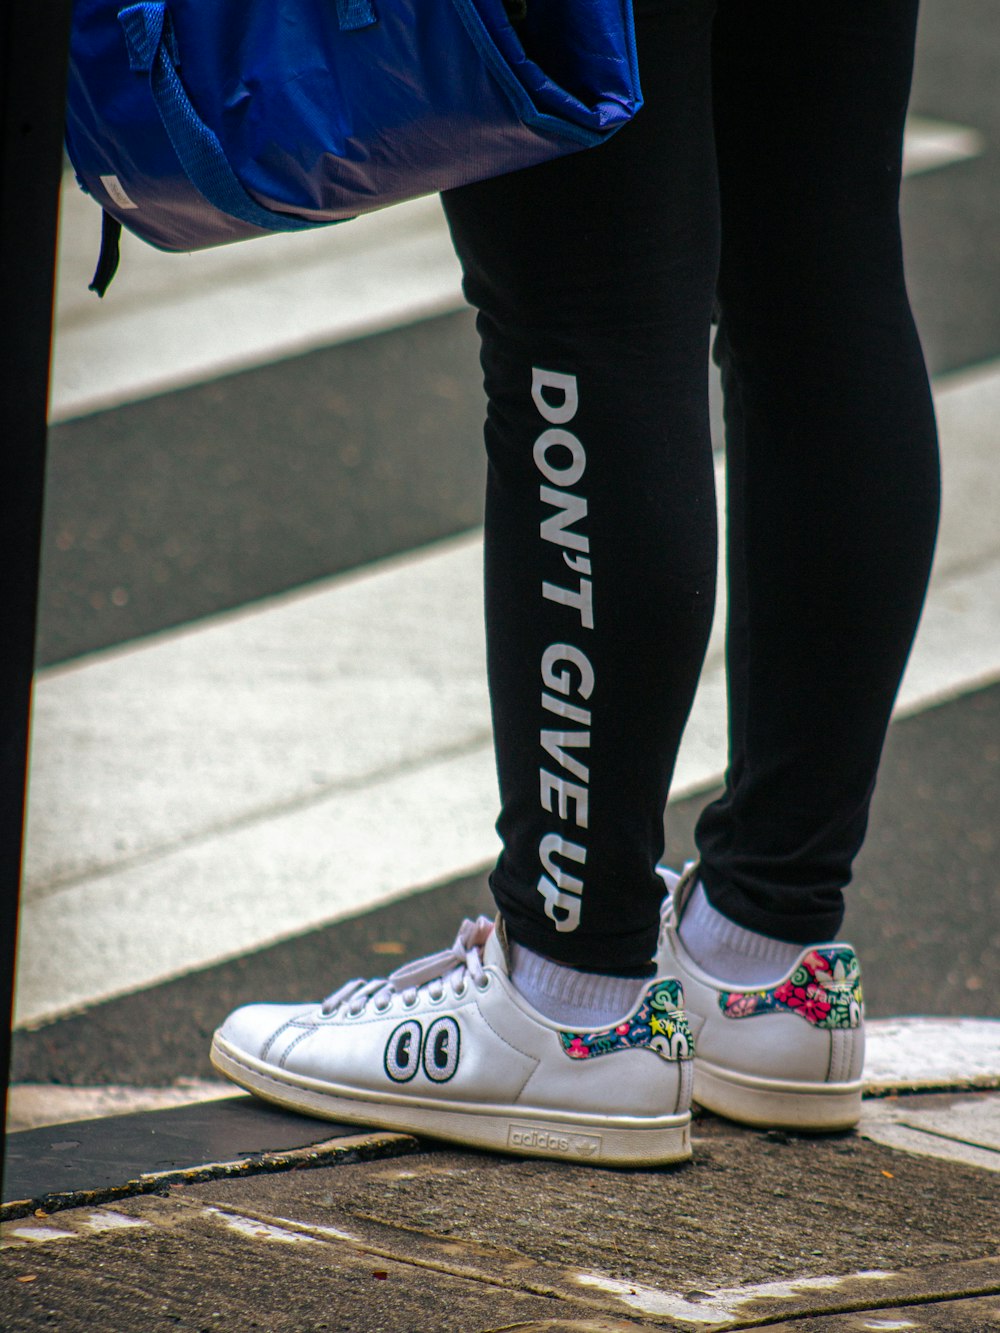 Person in black pants and white converse all star high top sneakers photo –  Free Shoe Image on Unsplash